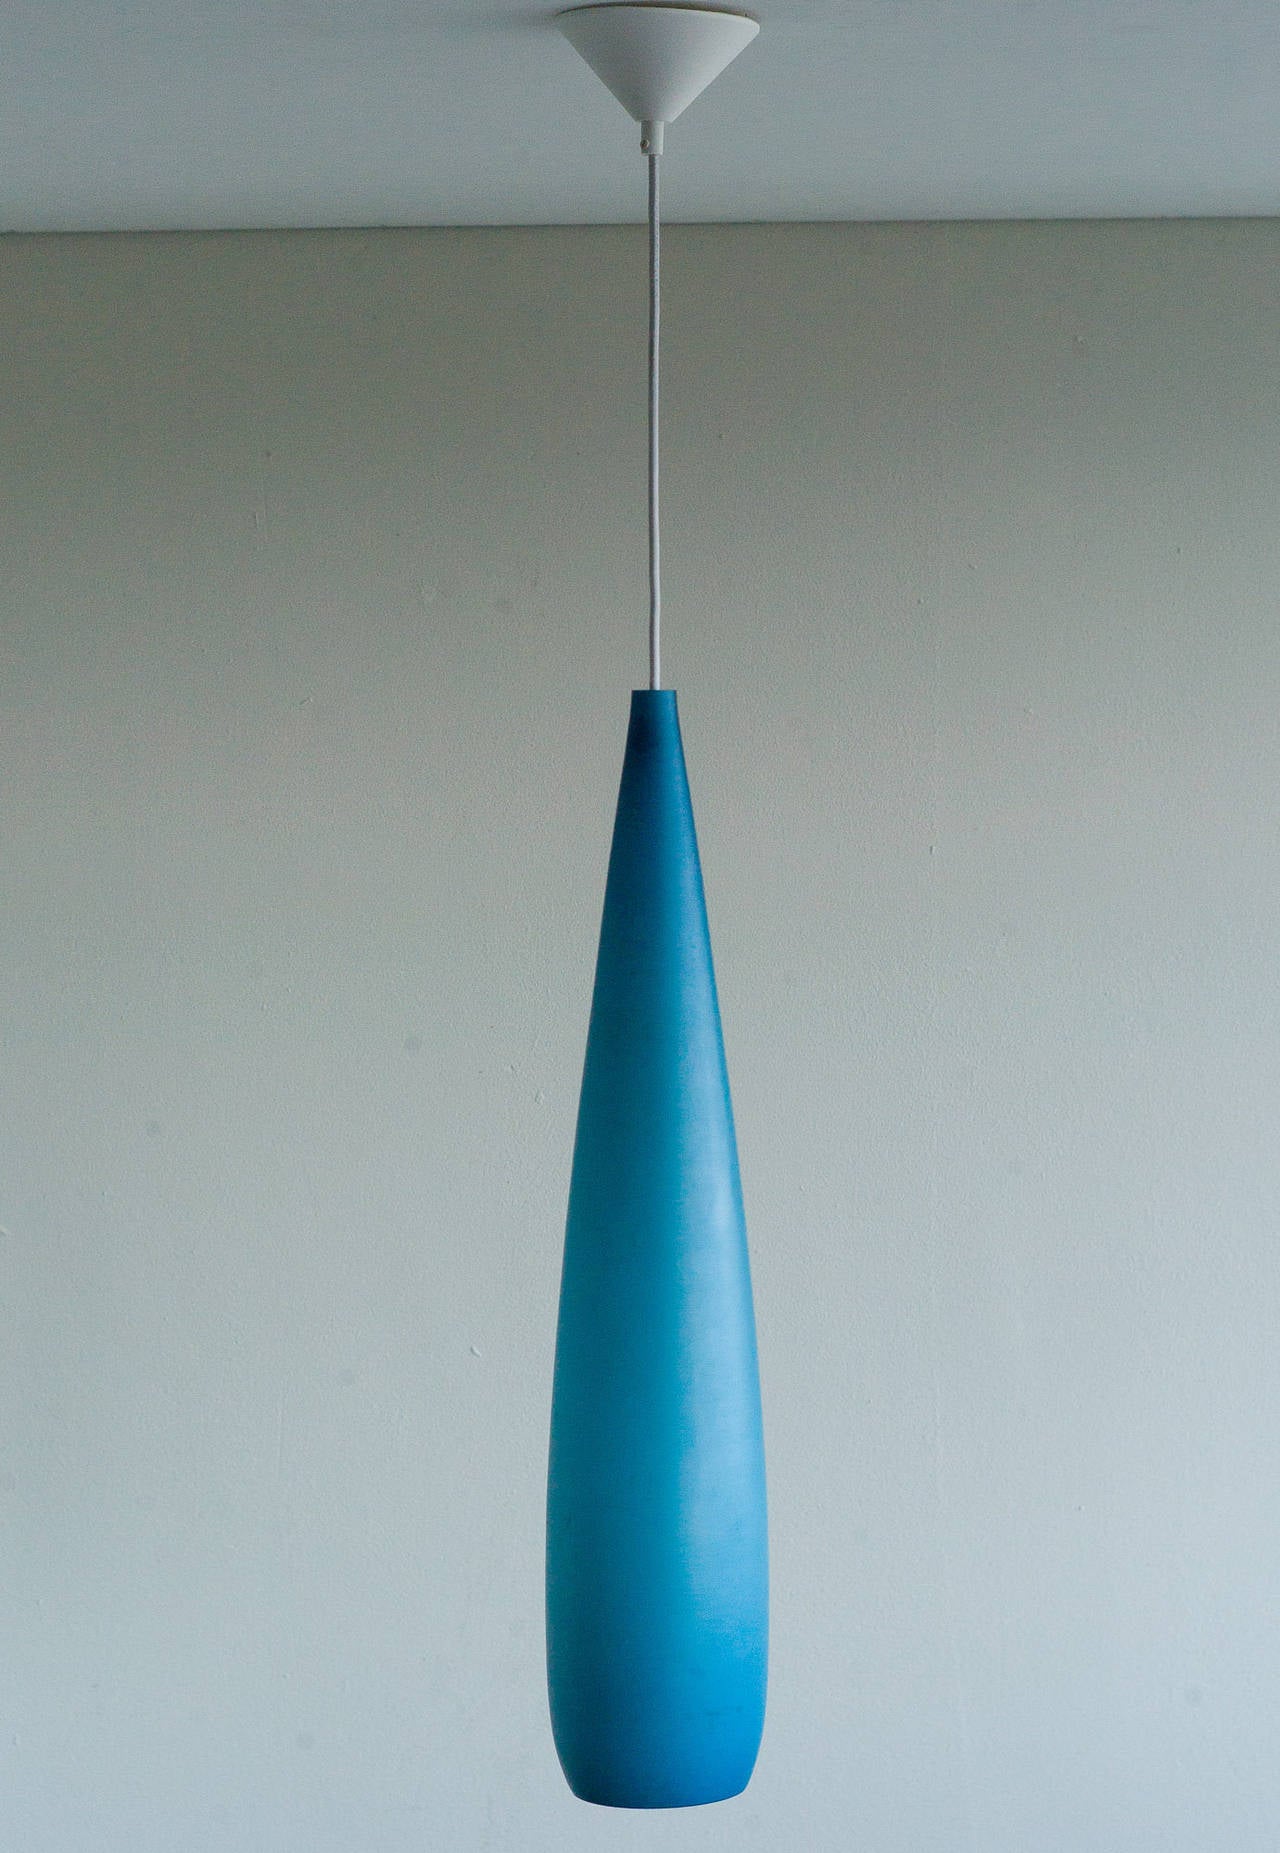 Very tall Holmegaard pendant, in beautiful matte blue. 
Marked with Holmegaard label.